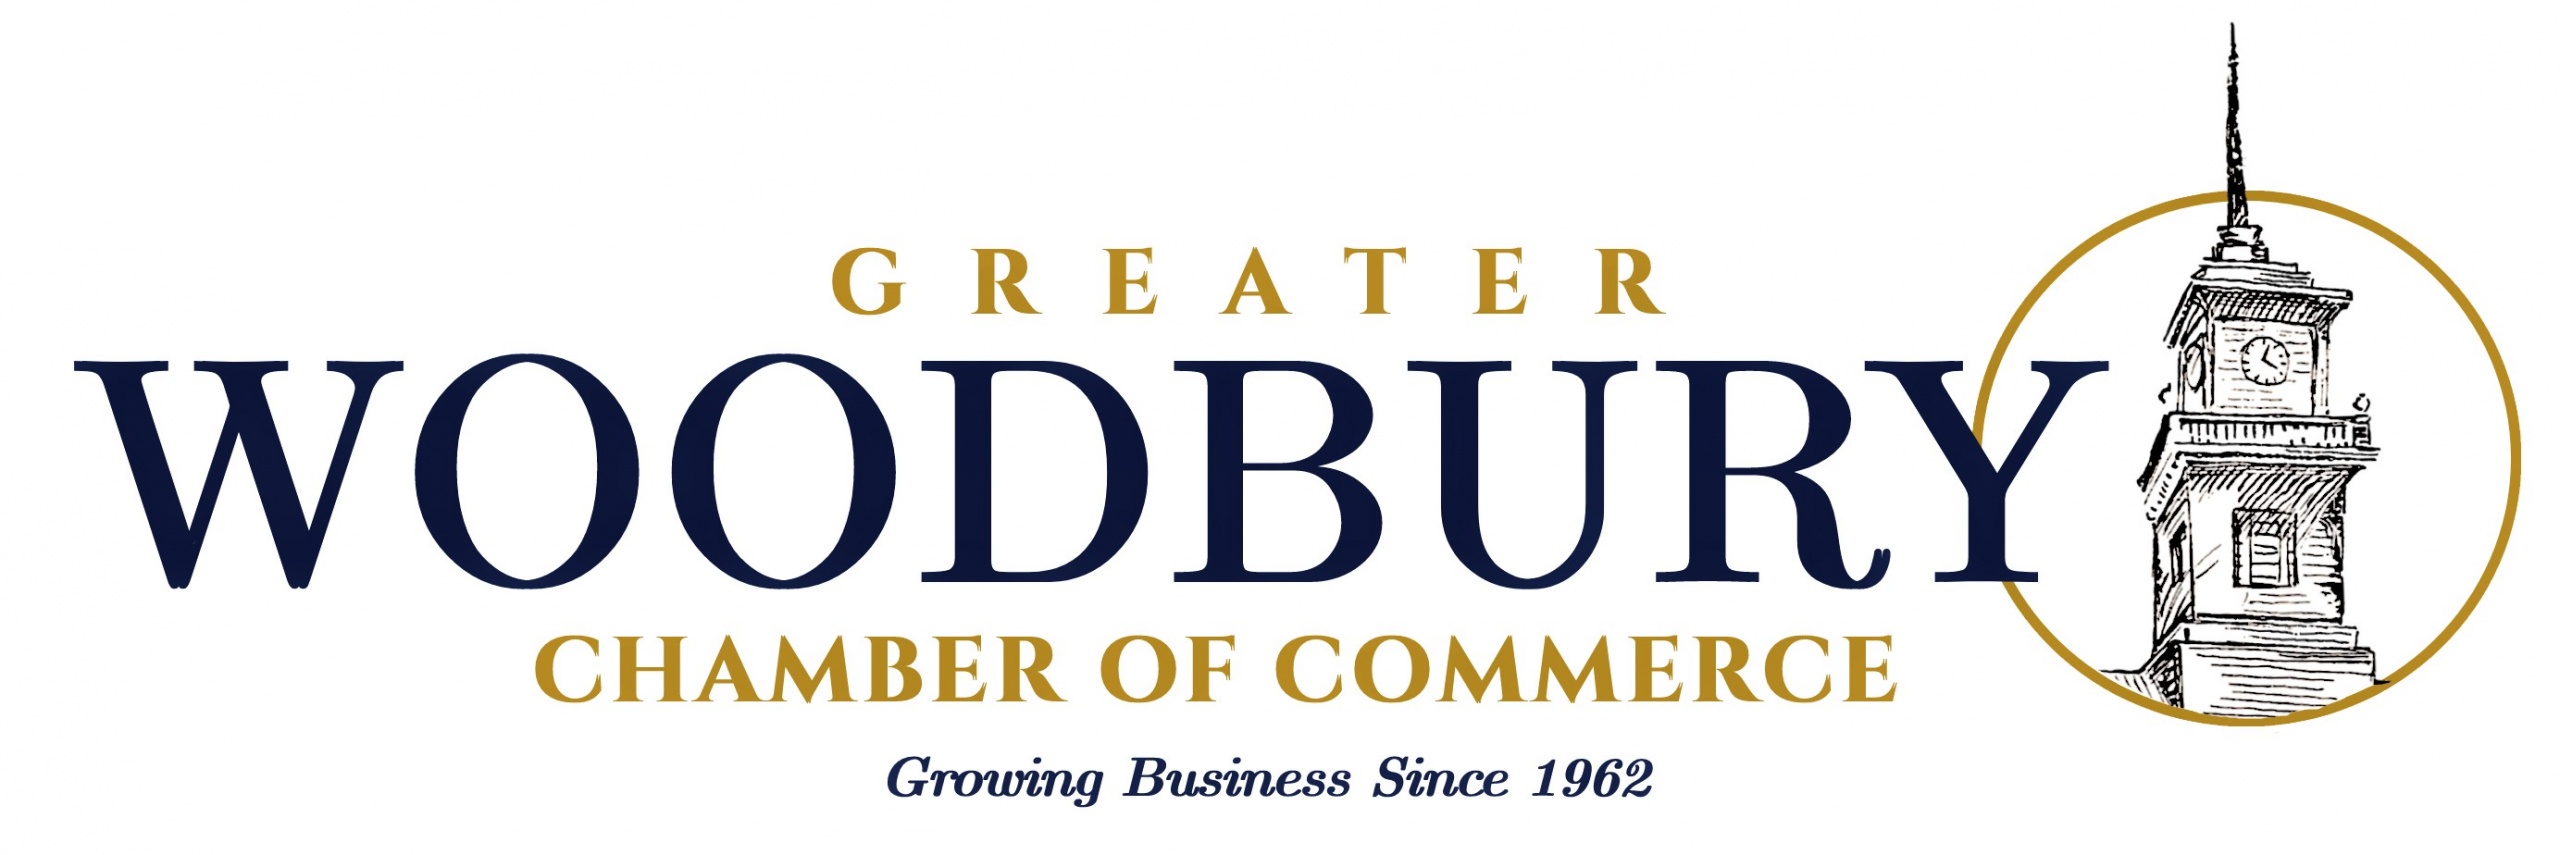 Greater Woodbury Chamber of Commerce